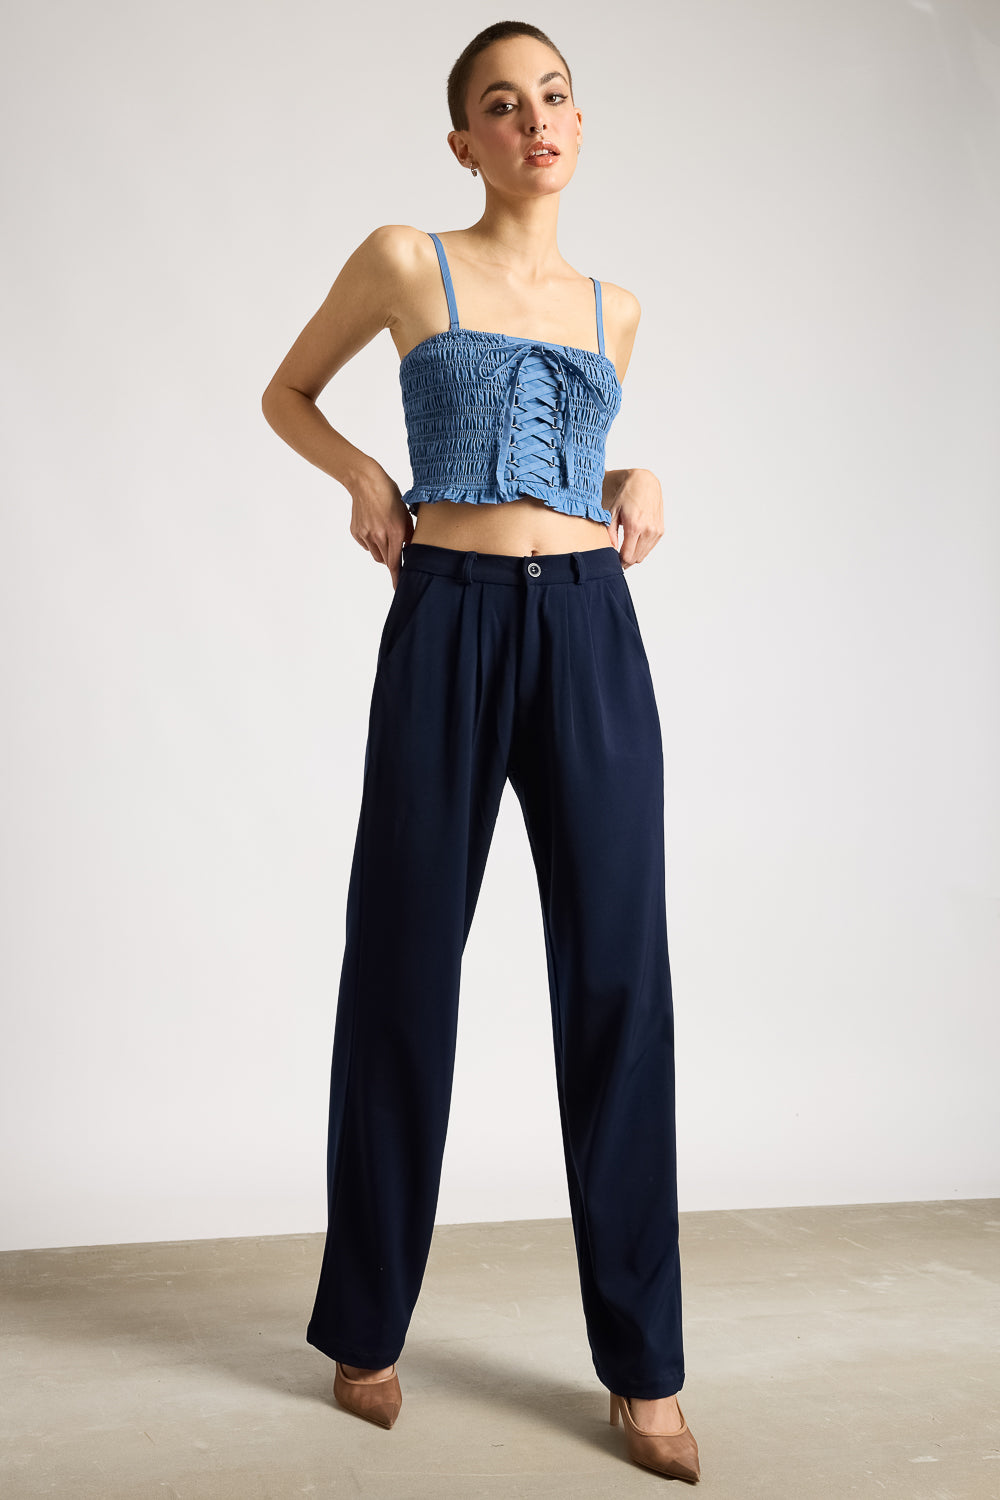 NAVY BLUE PLEATED STRAIGHT FIT KOREAN PANT